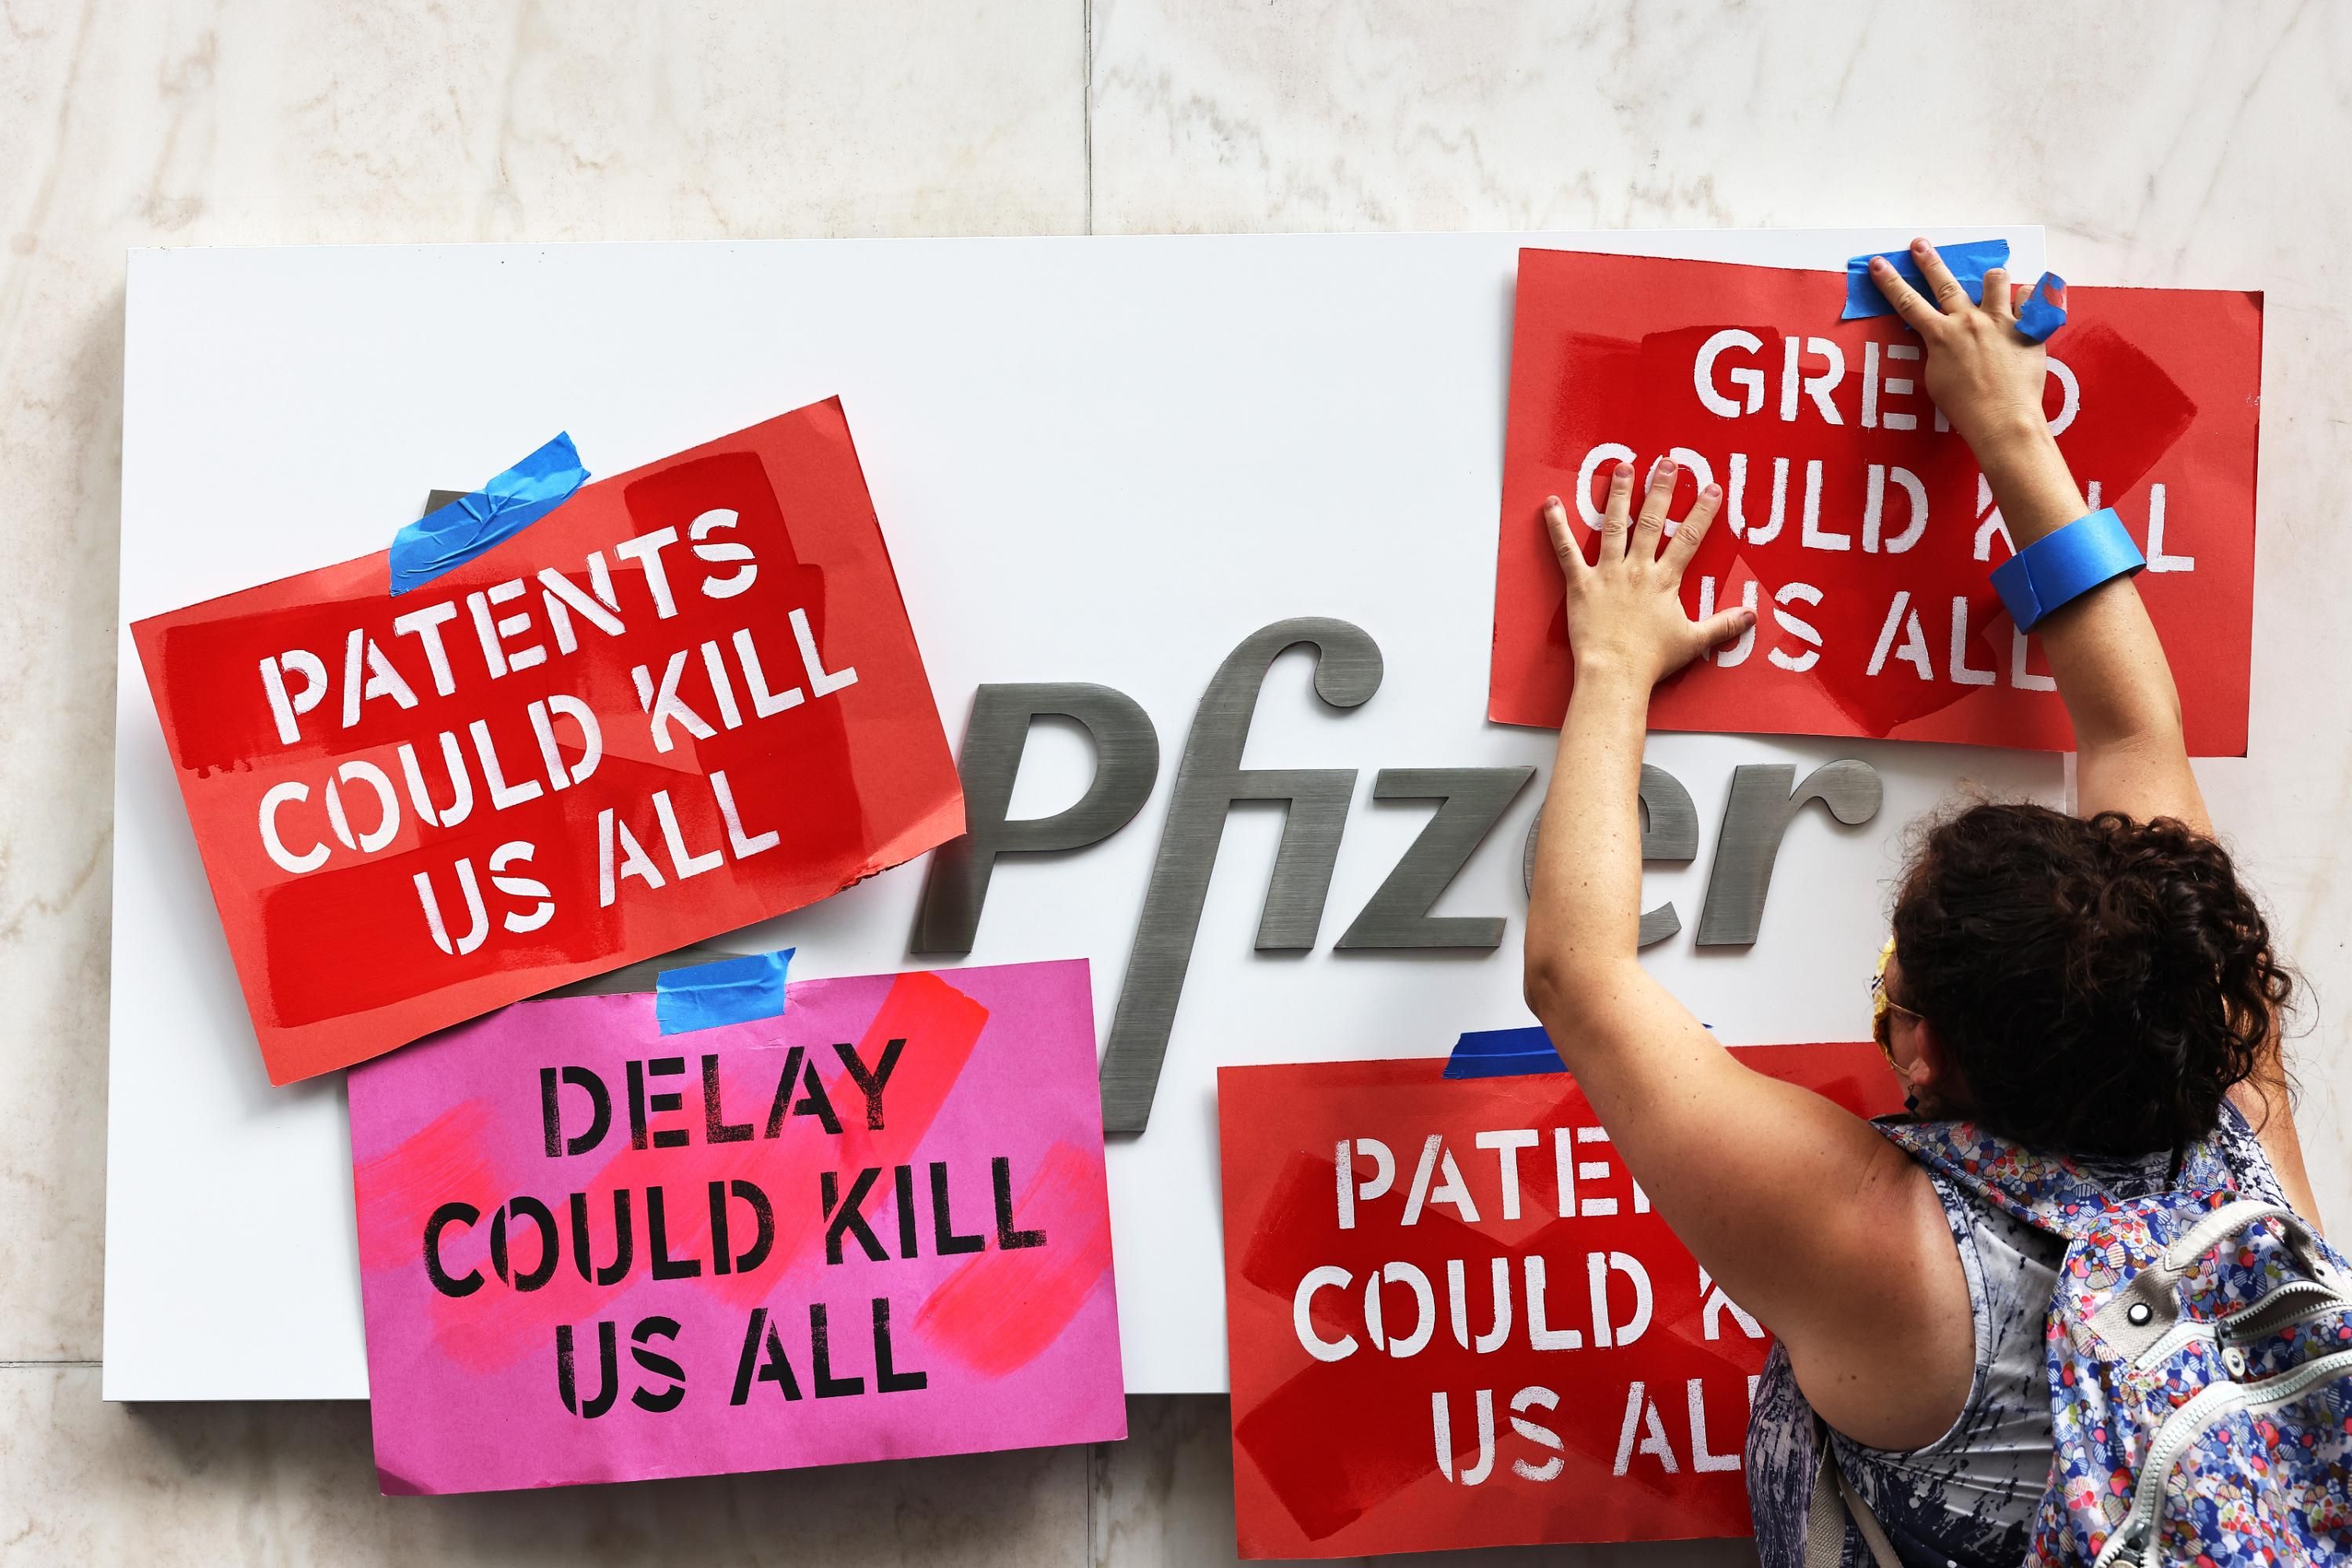 A demonstrator tapes signs to Pfizer headquarters